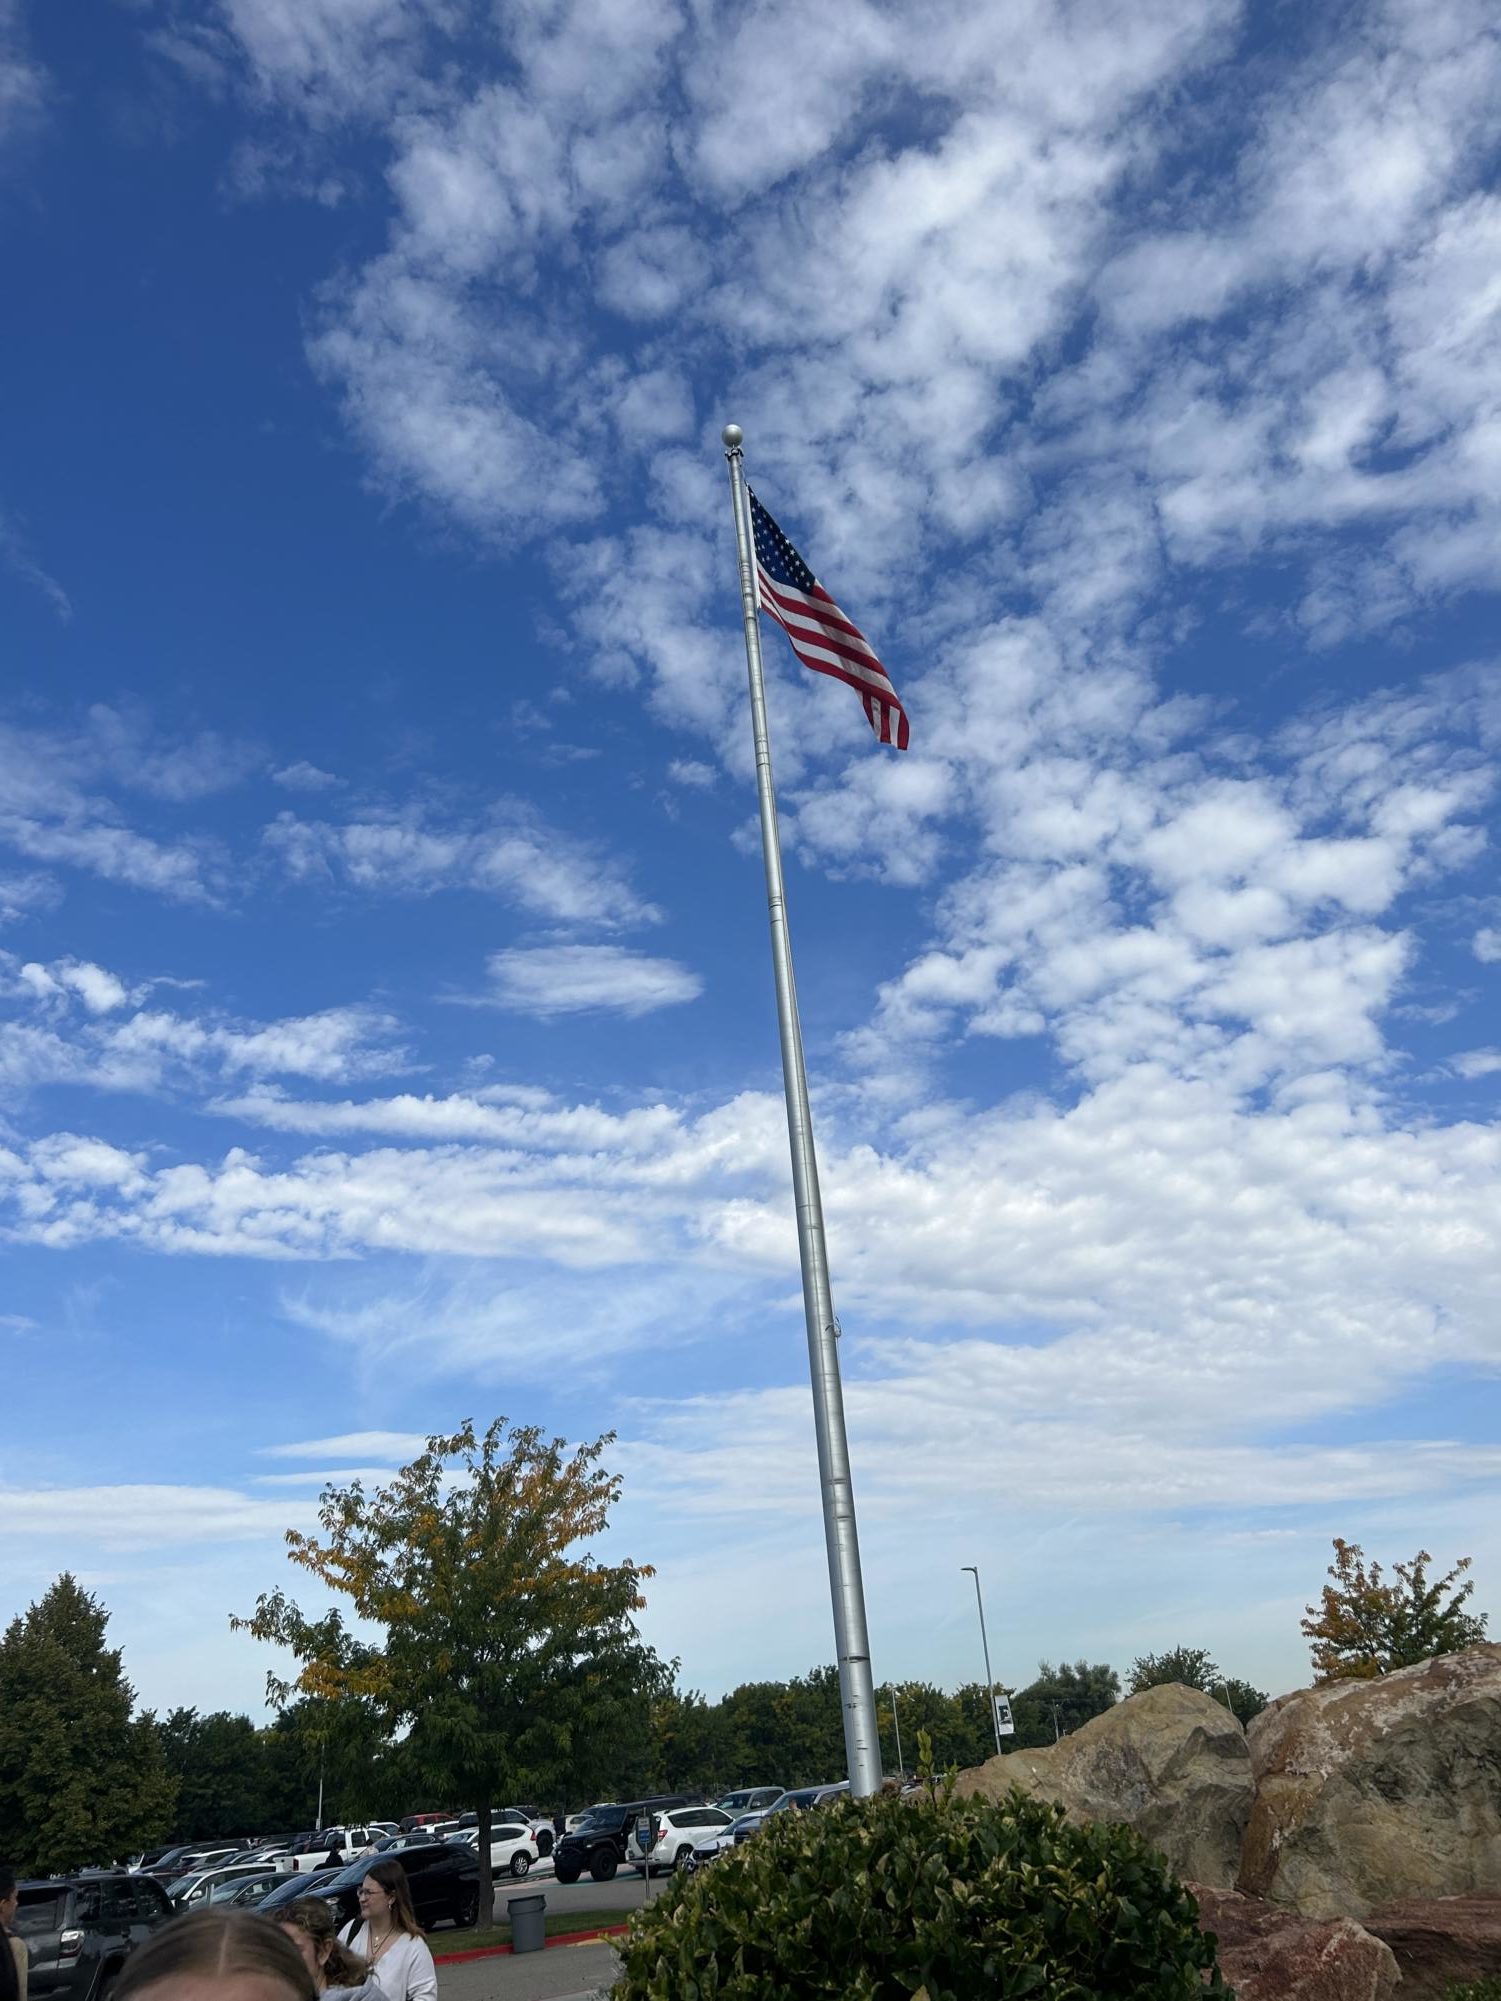 The American flag is flying high at Eagle High, and soon a new generation of voters will be able to impact the American Government.